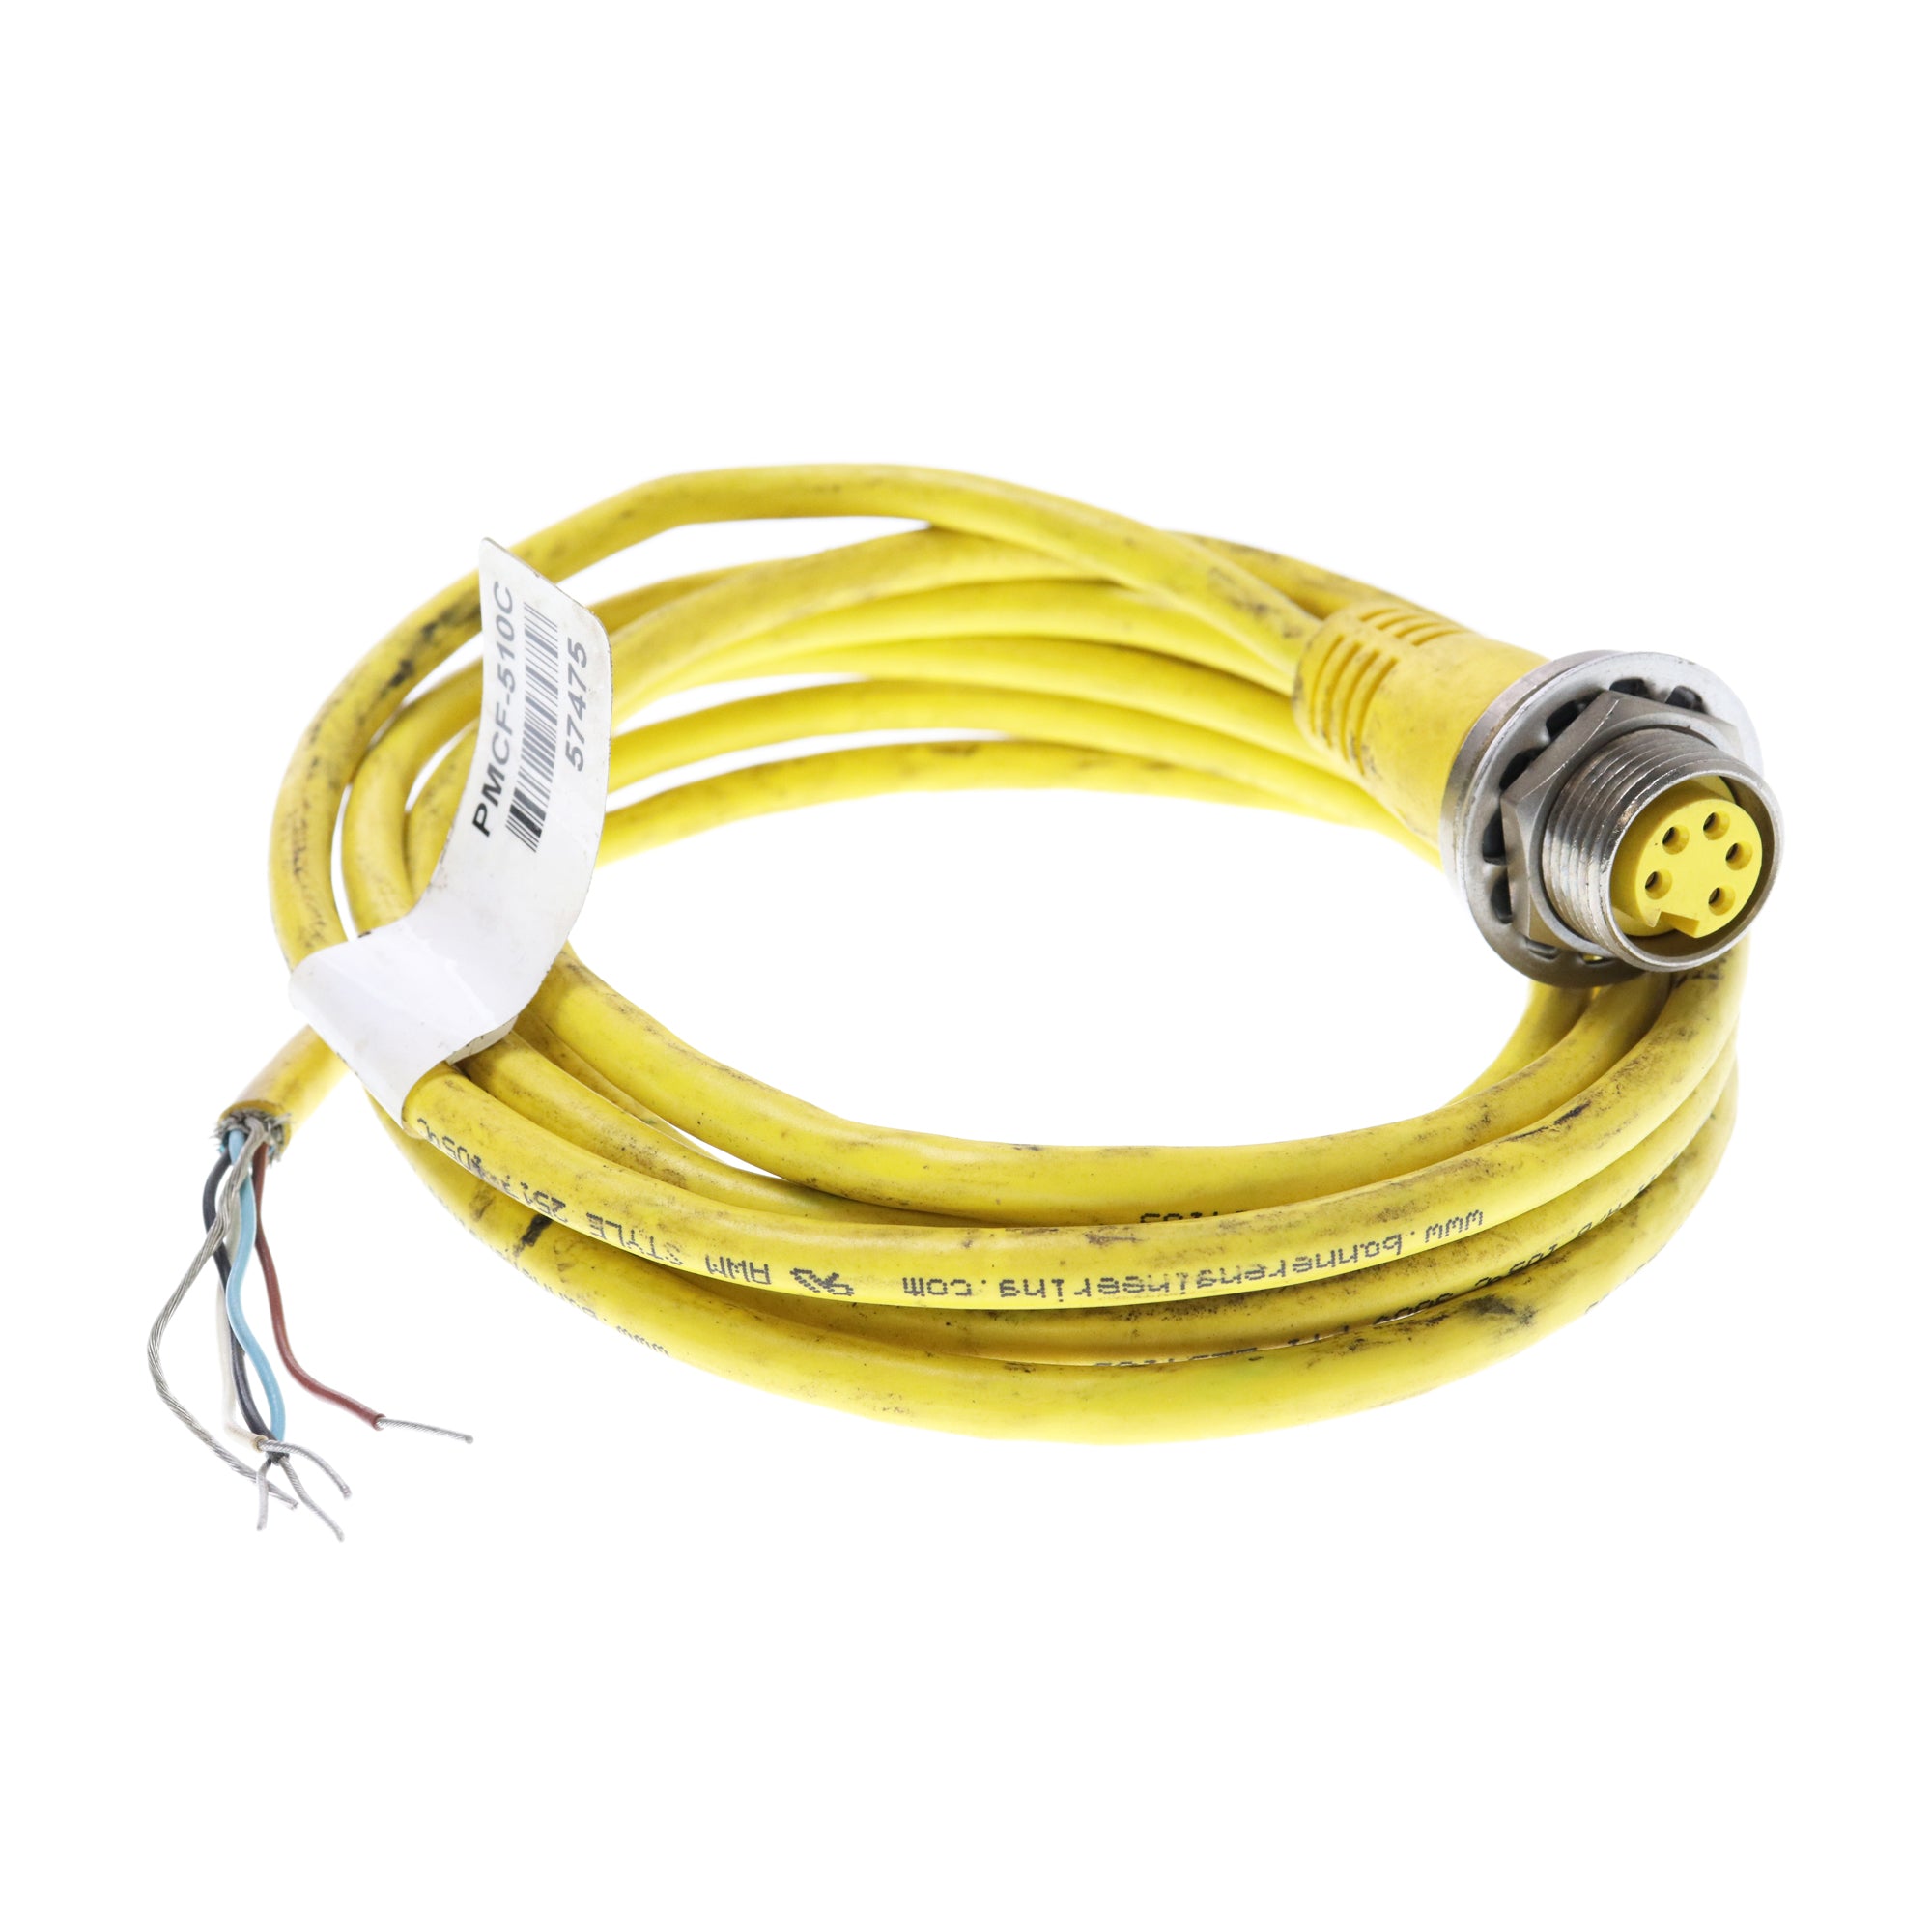 Banner, BANNER 57475 PMCF-510C 5-PIN FEMALE STRAIGHT CABLE ASSEMBLY, 12-FEET